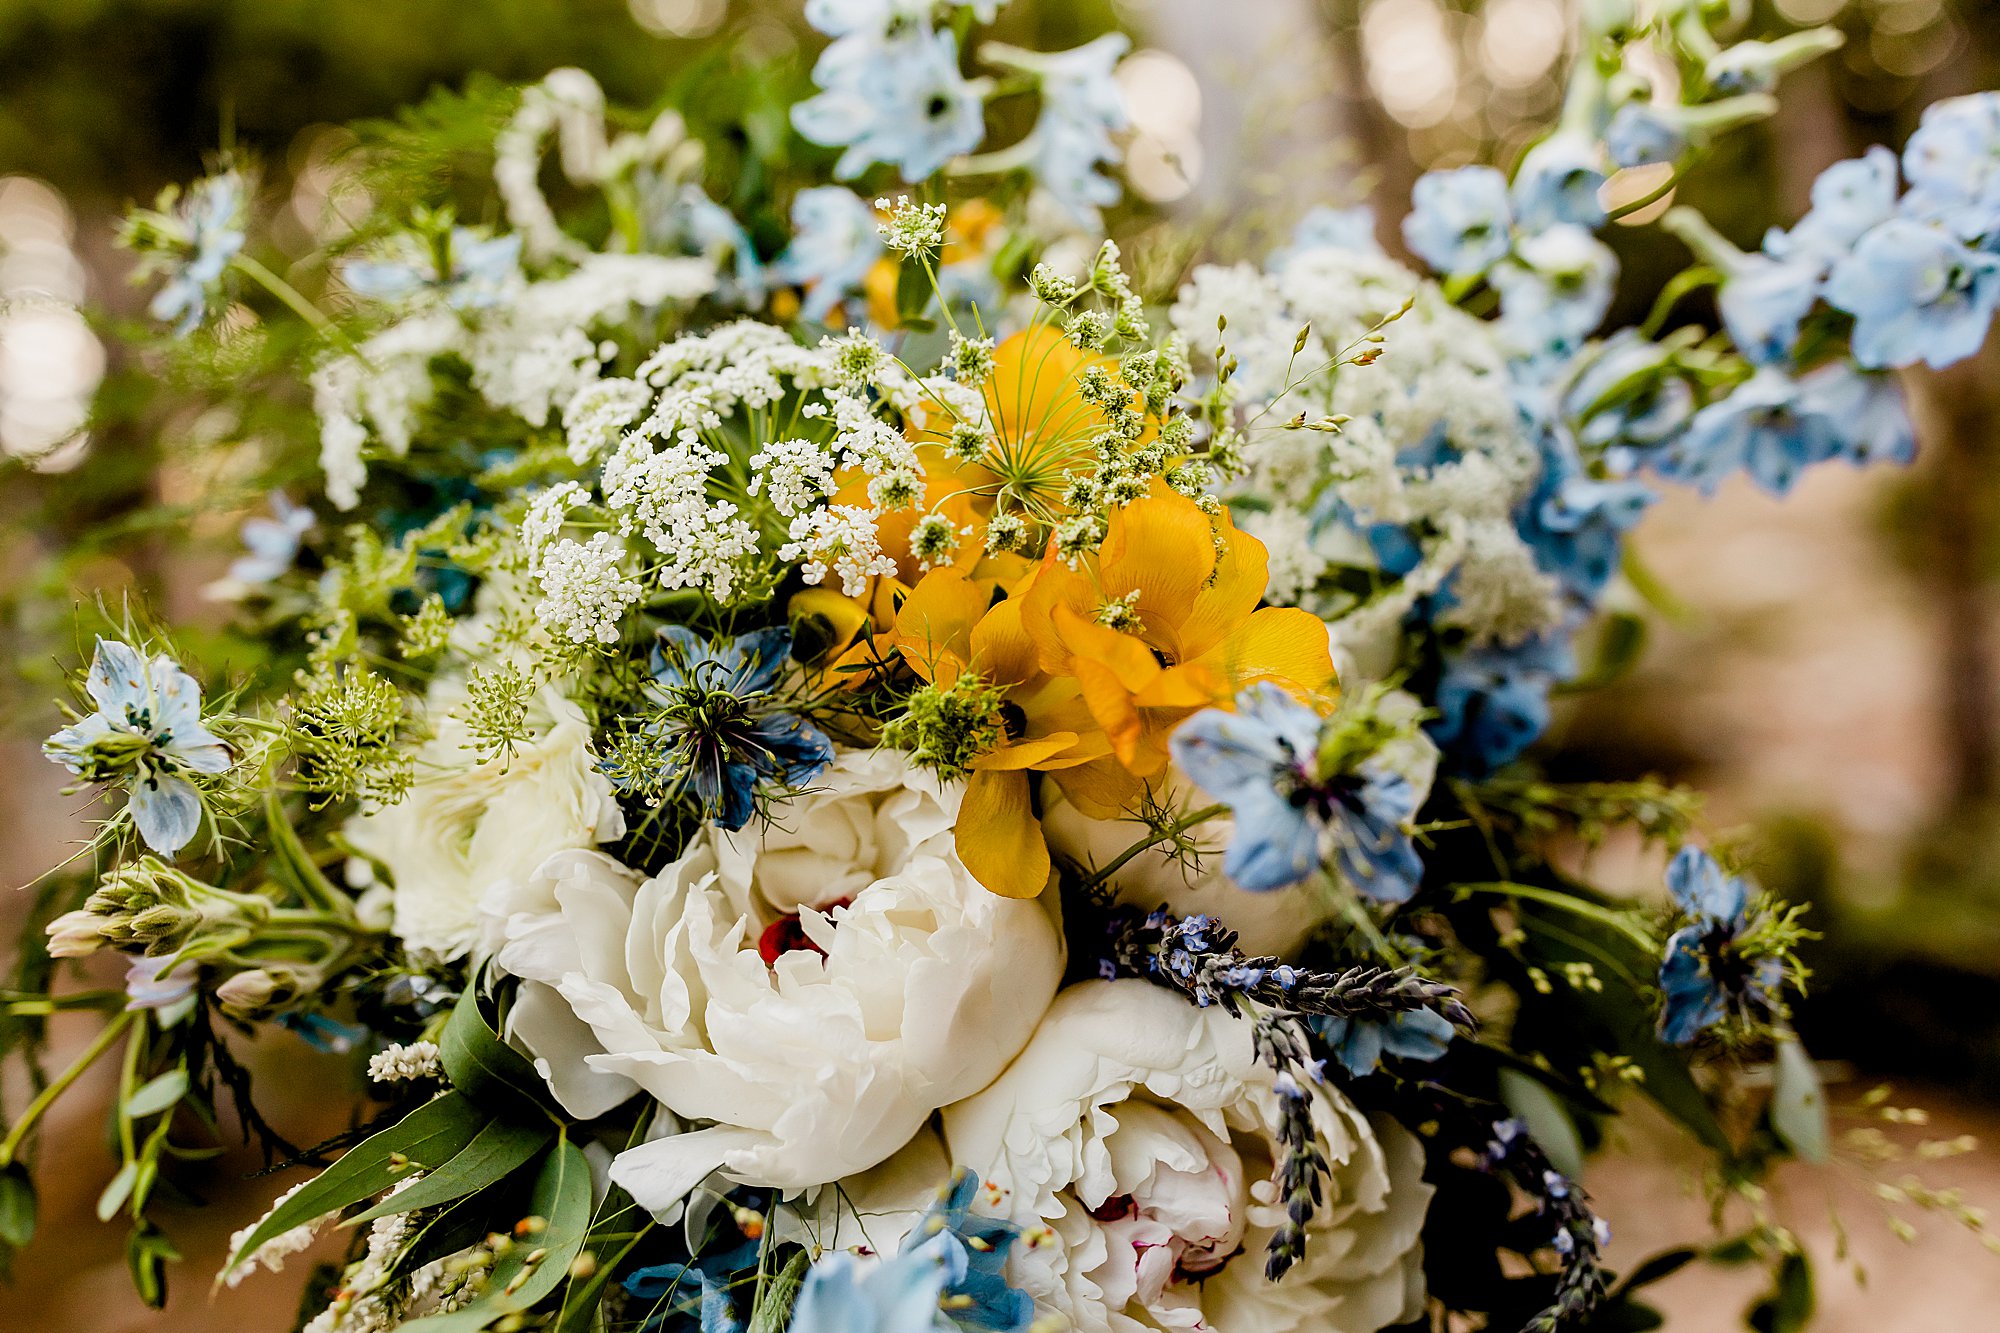 beautiful bridal bouquet with different types of flowers in blue, white, yellow, and green